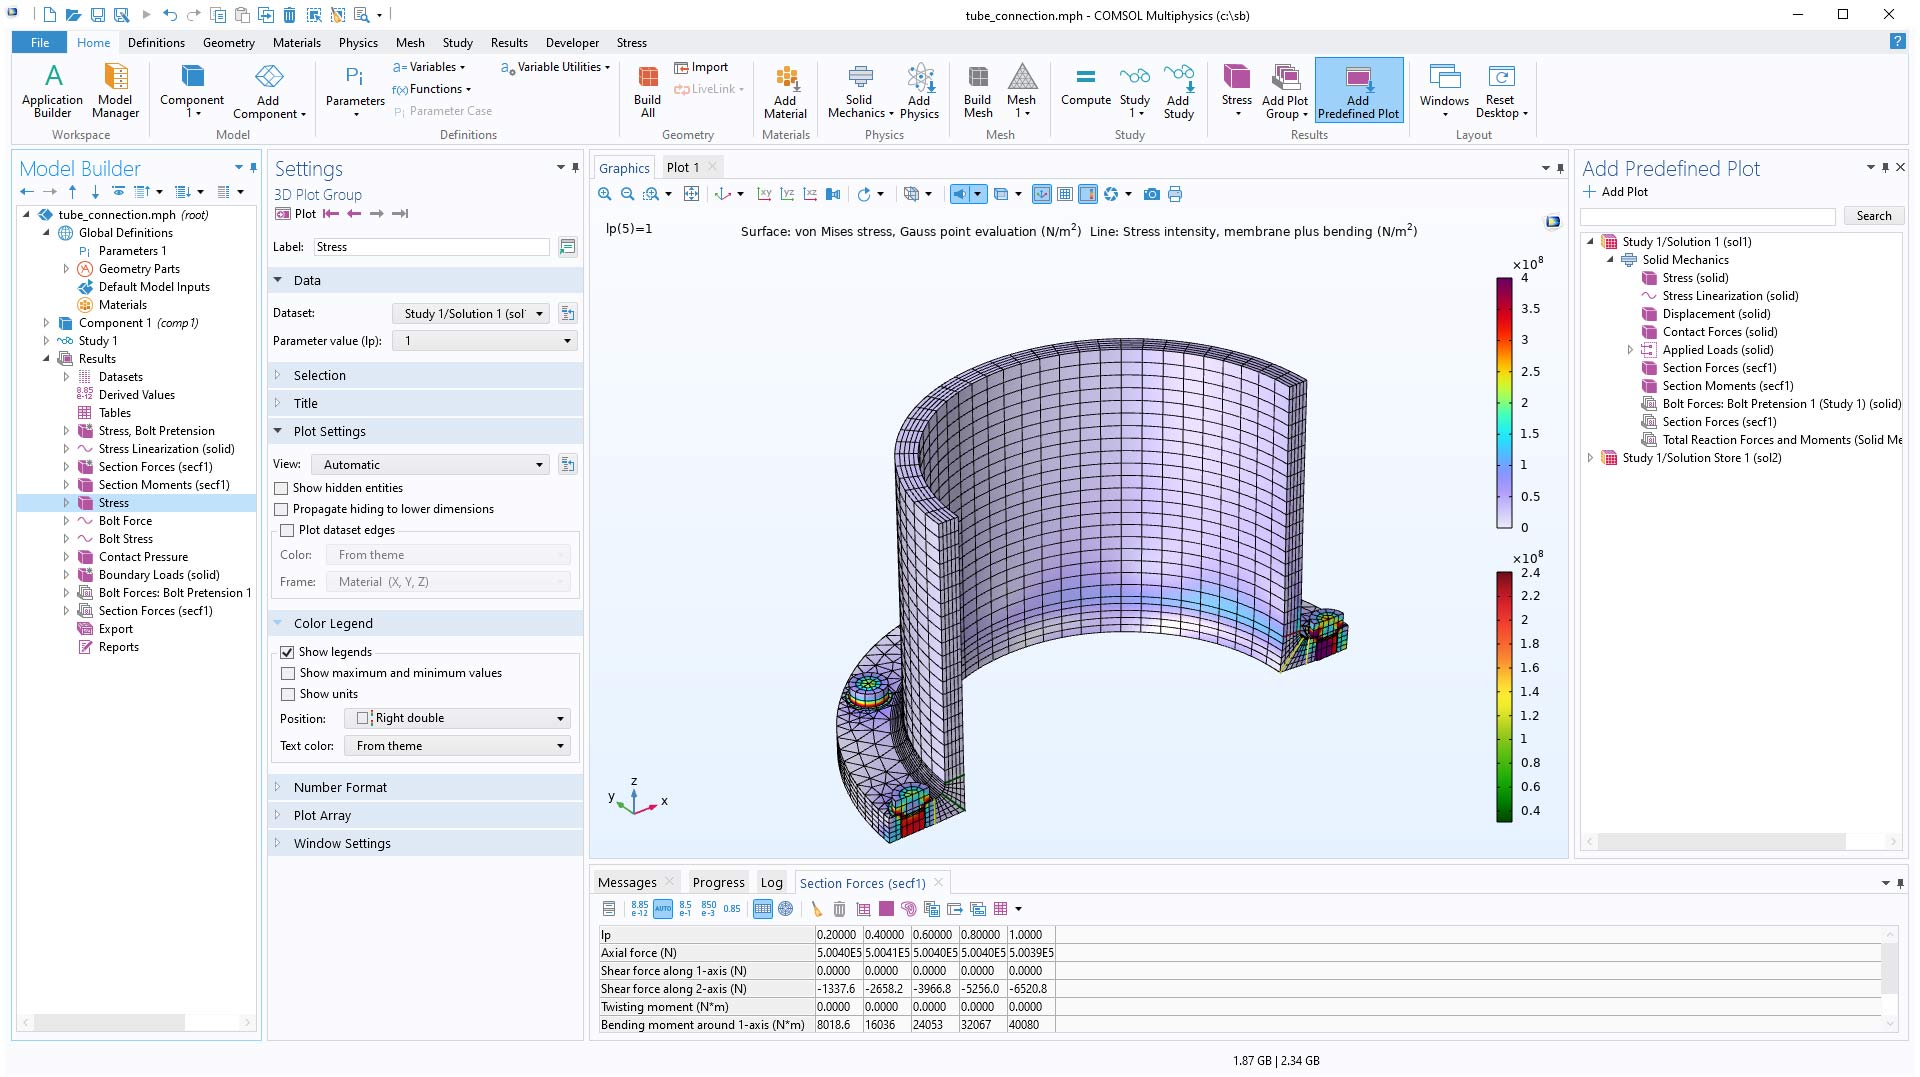 The COMSOL Multiphysics UI showing the Model Builder with a 3D Plot Group node highlighted, the corresponding Settings window, a tube connection model in the Graphics window, and an Add Predefined Plot window.